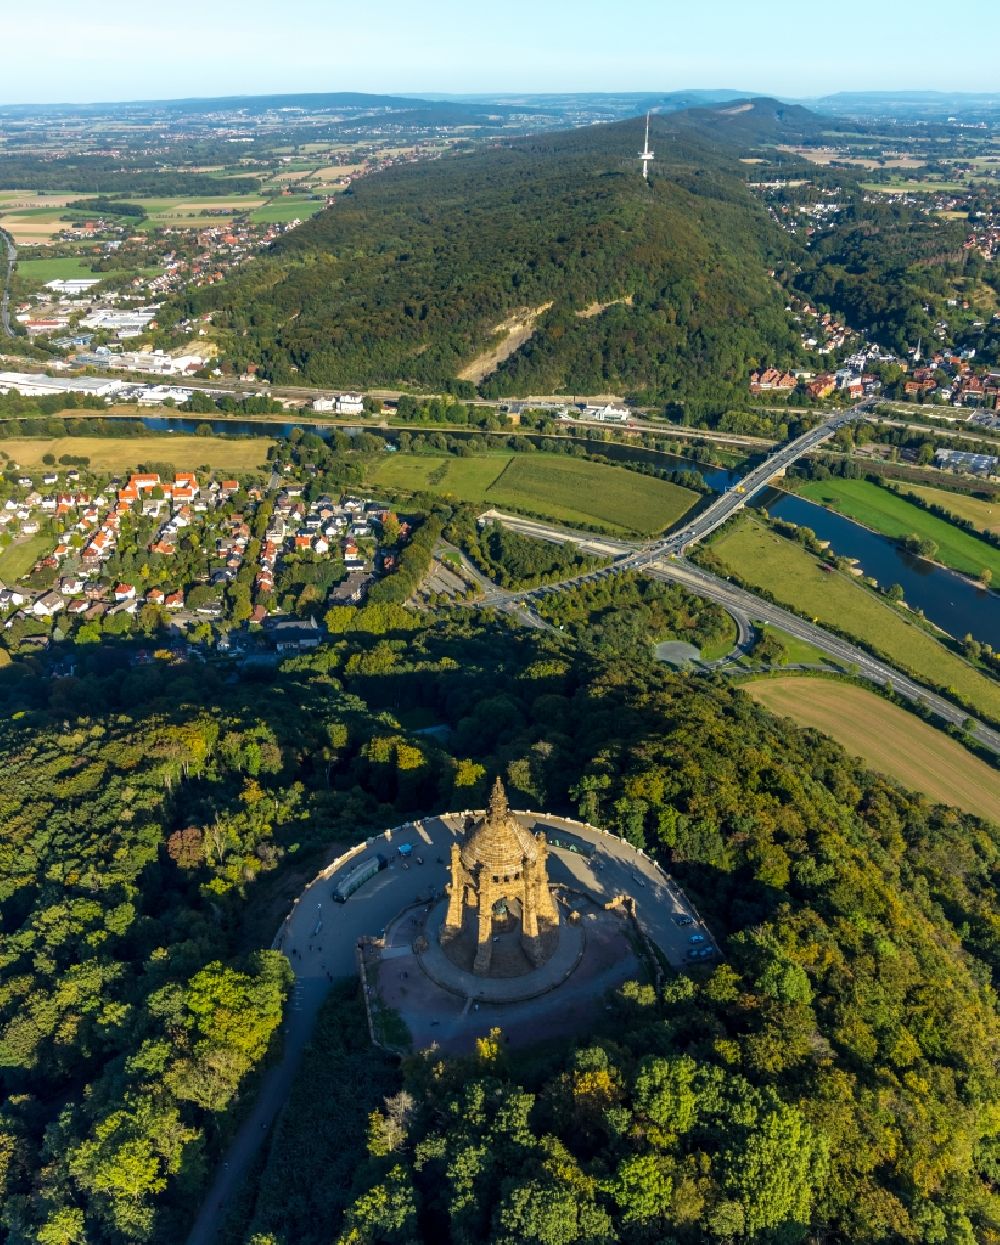 Aerial image Porta Westfalica - Tourist attraction of the historic monument Kaiser-Wilhelm-Denkmal in Porta Westfalica in the state North Rhine-Westphalia, Germany